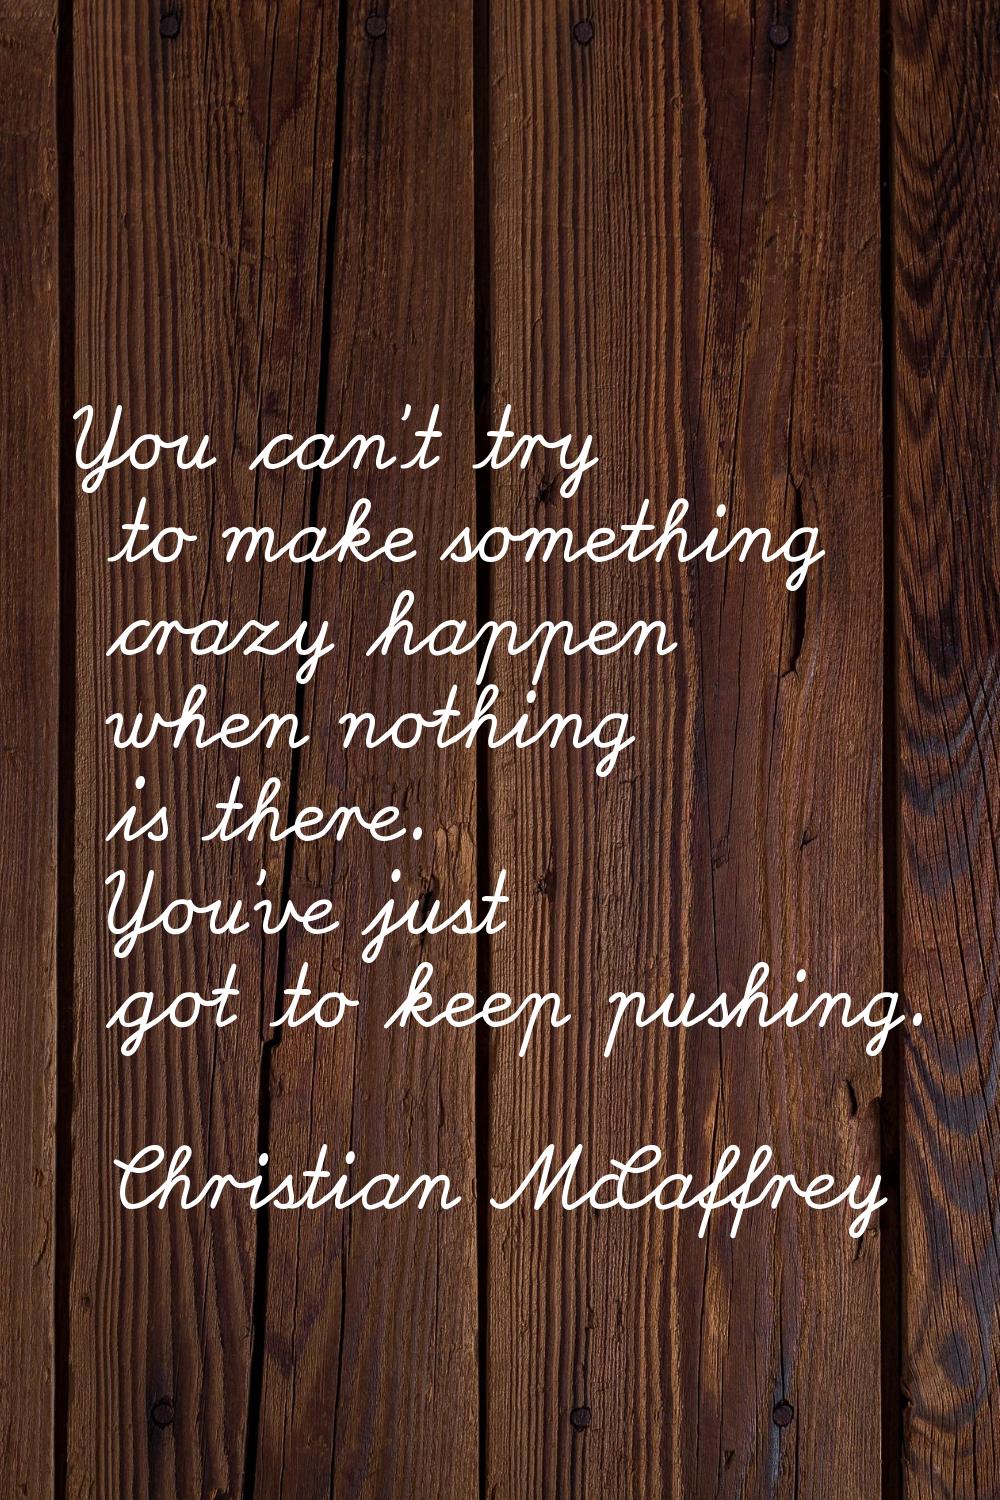 You can't try to make something crazy happen when nothing is there. You've just got to keep pushing